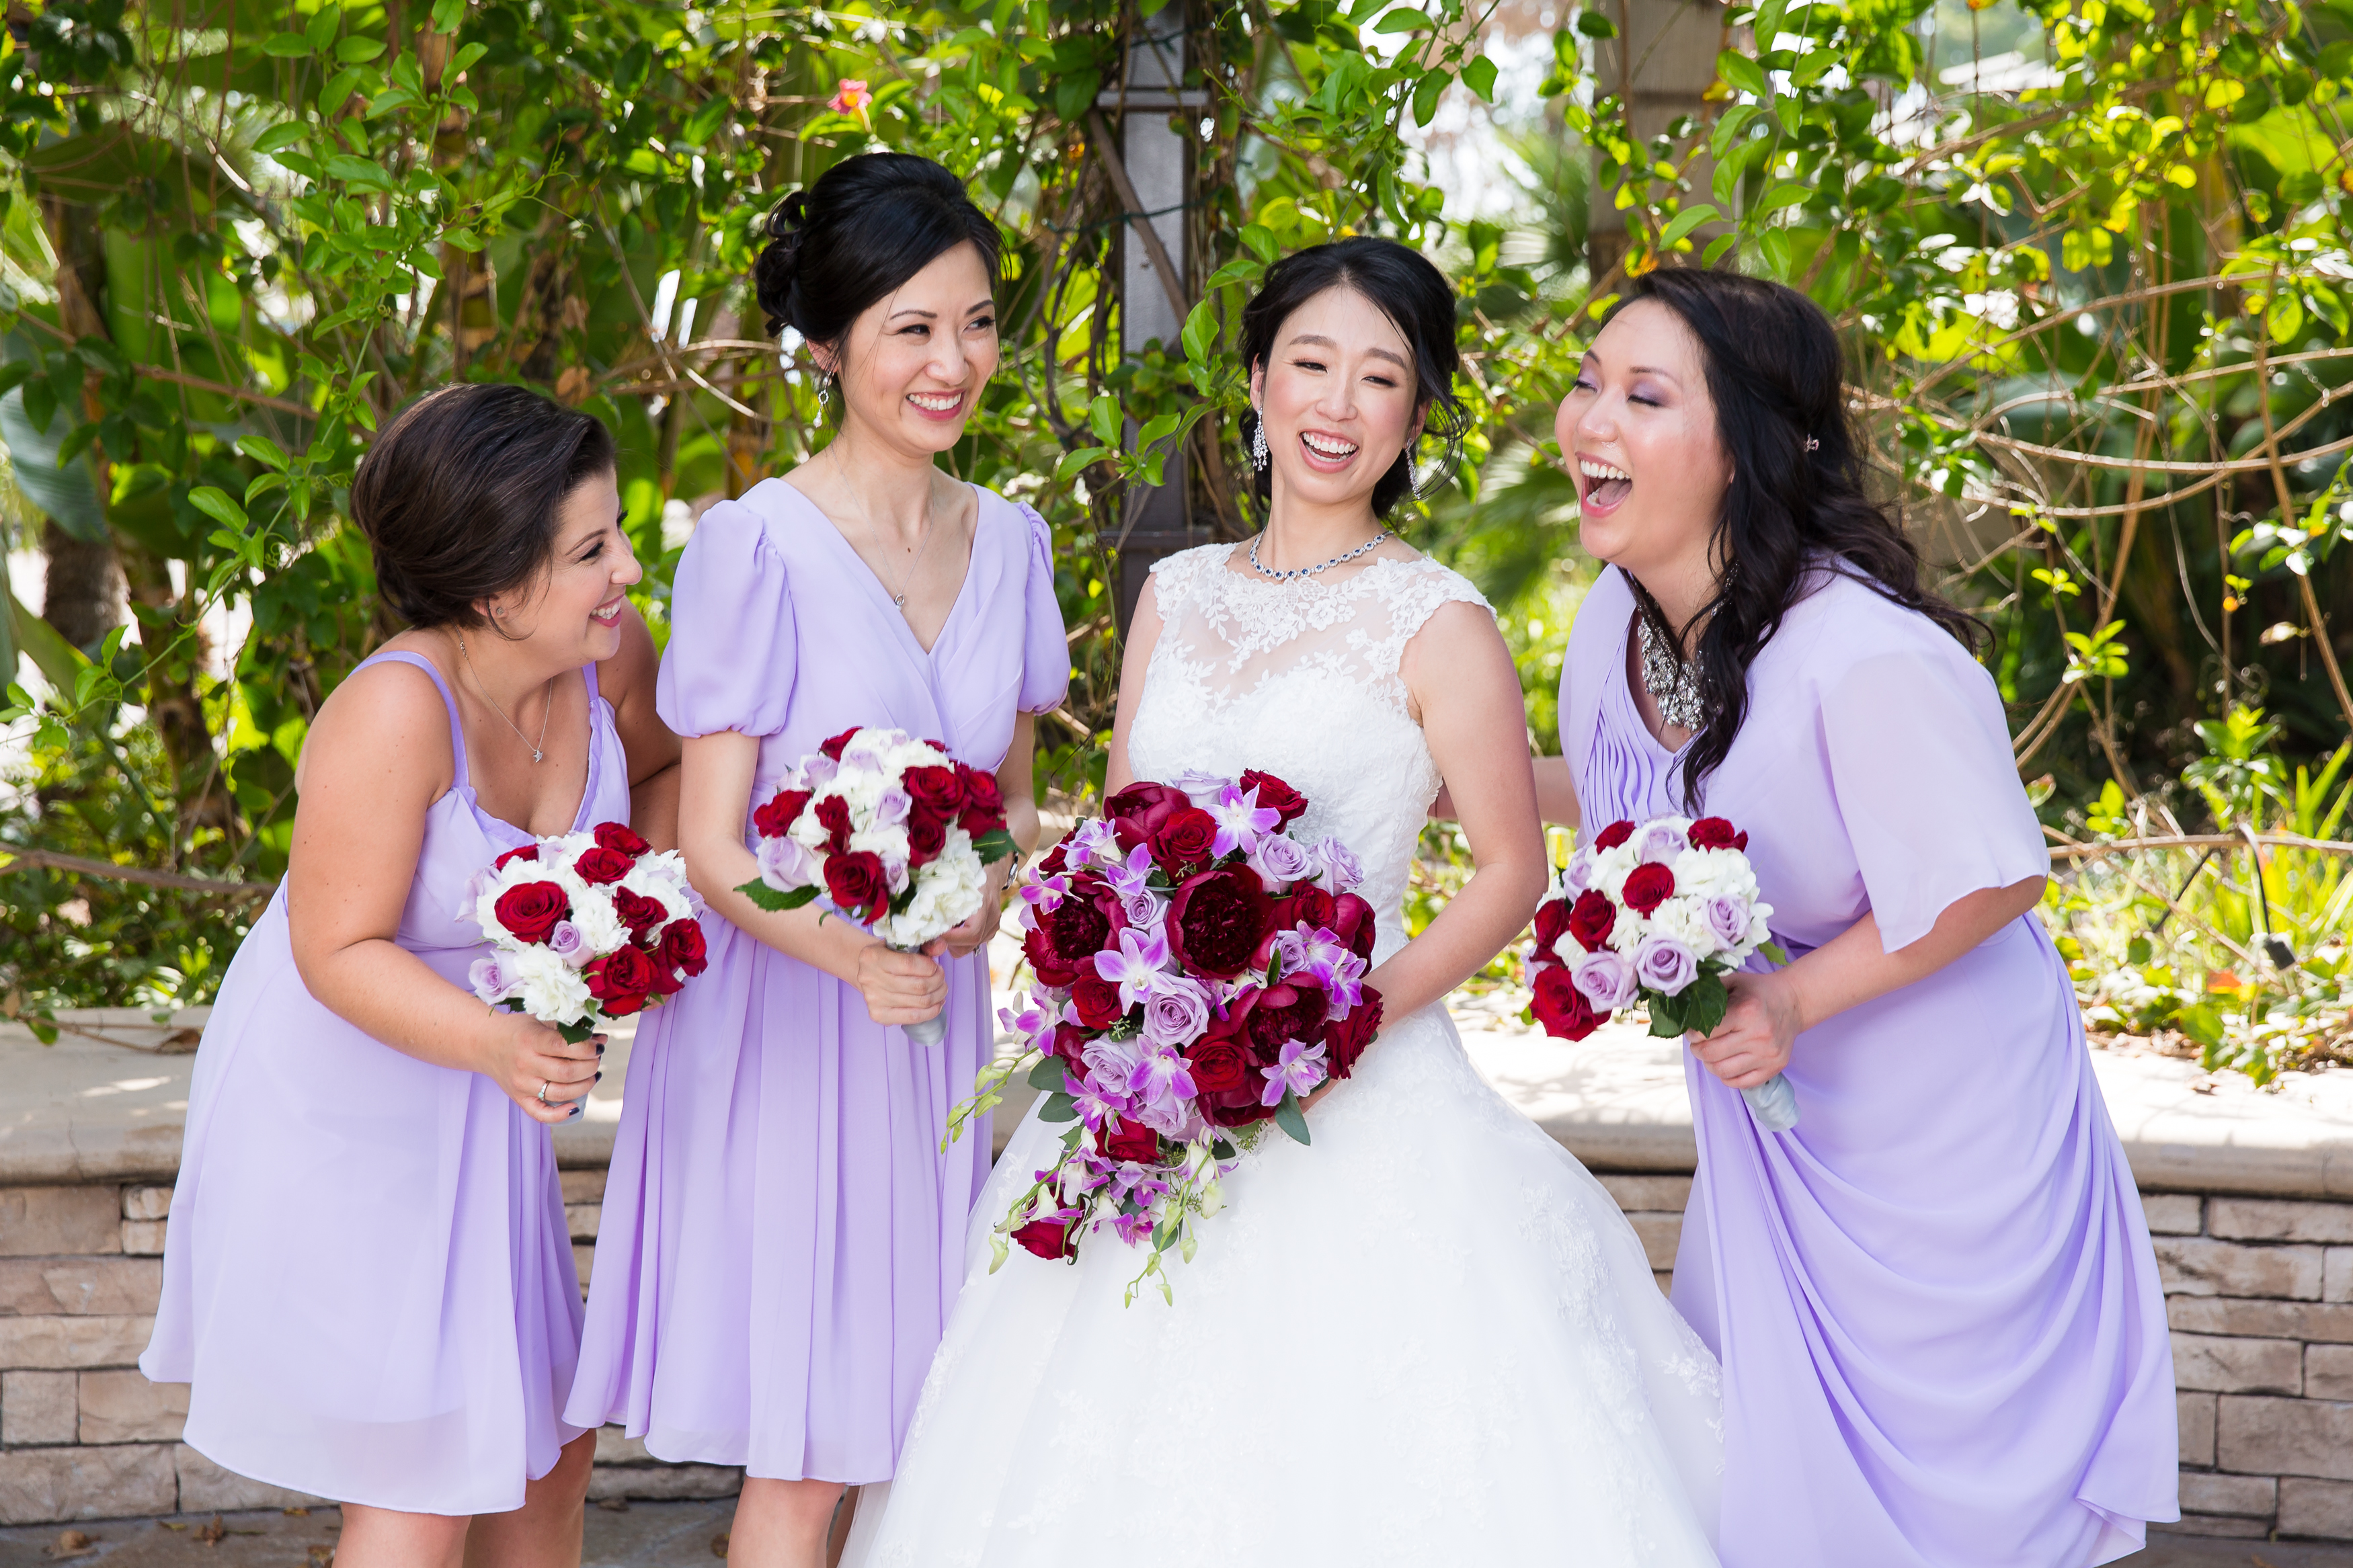 Wedding party laughing in purple dresses next to trees